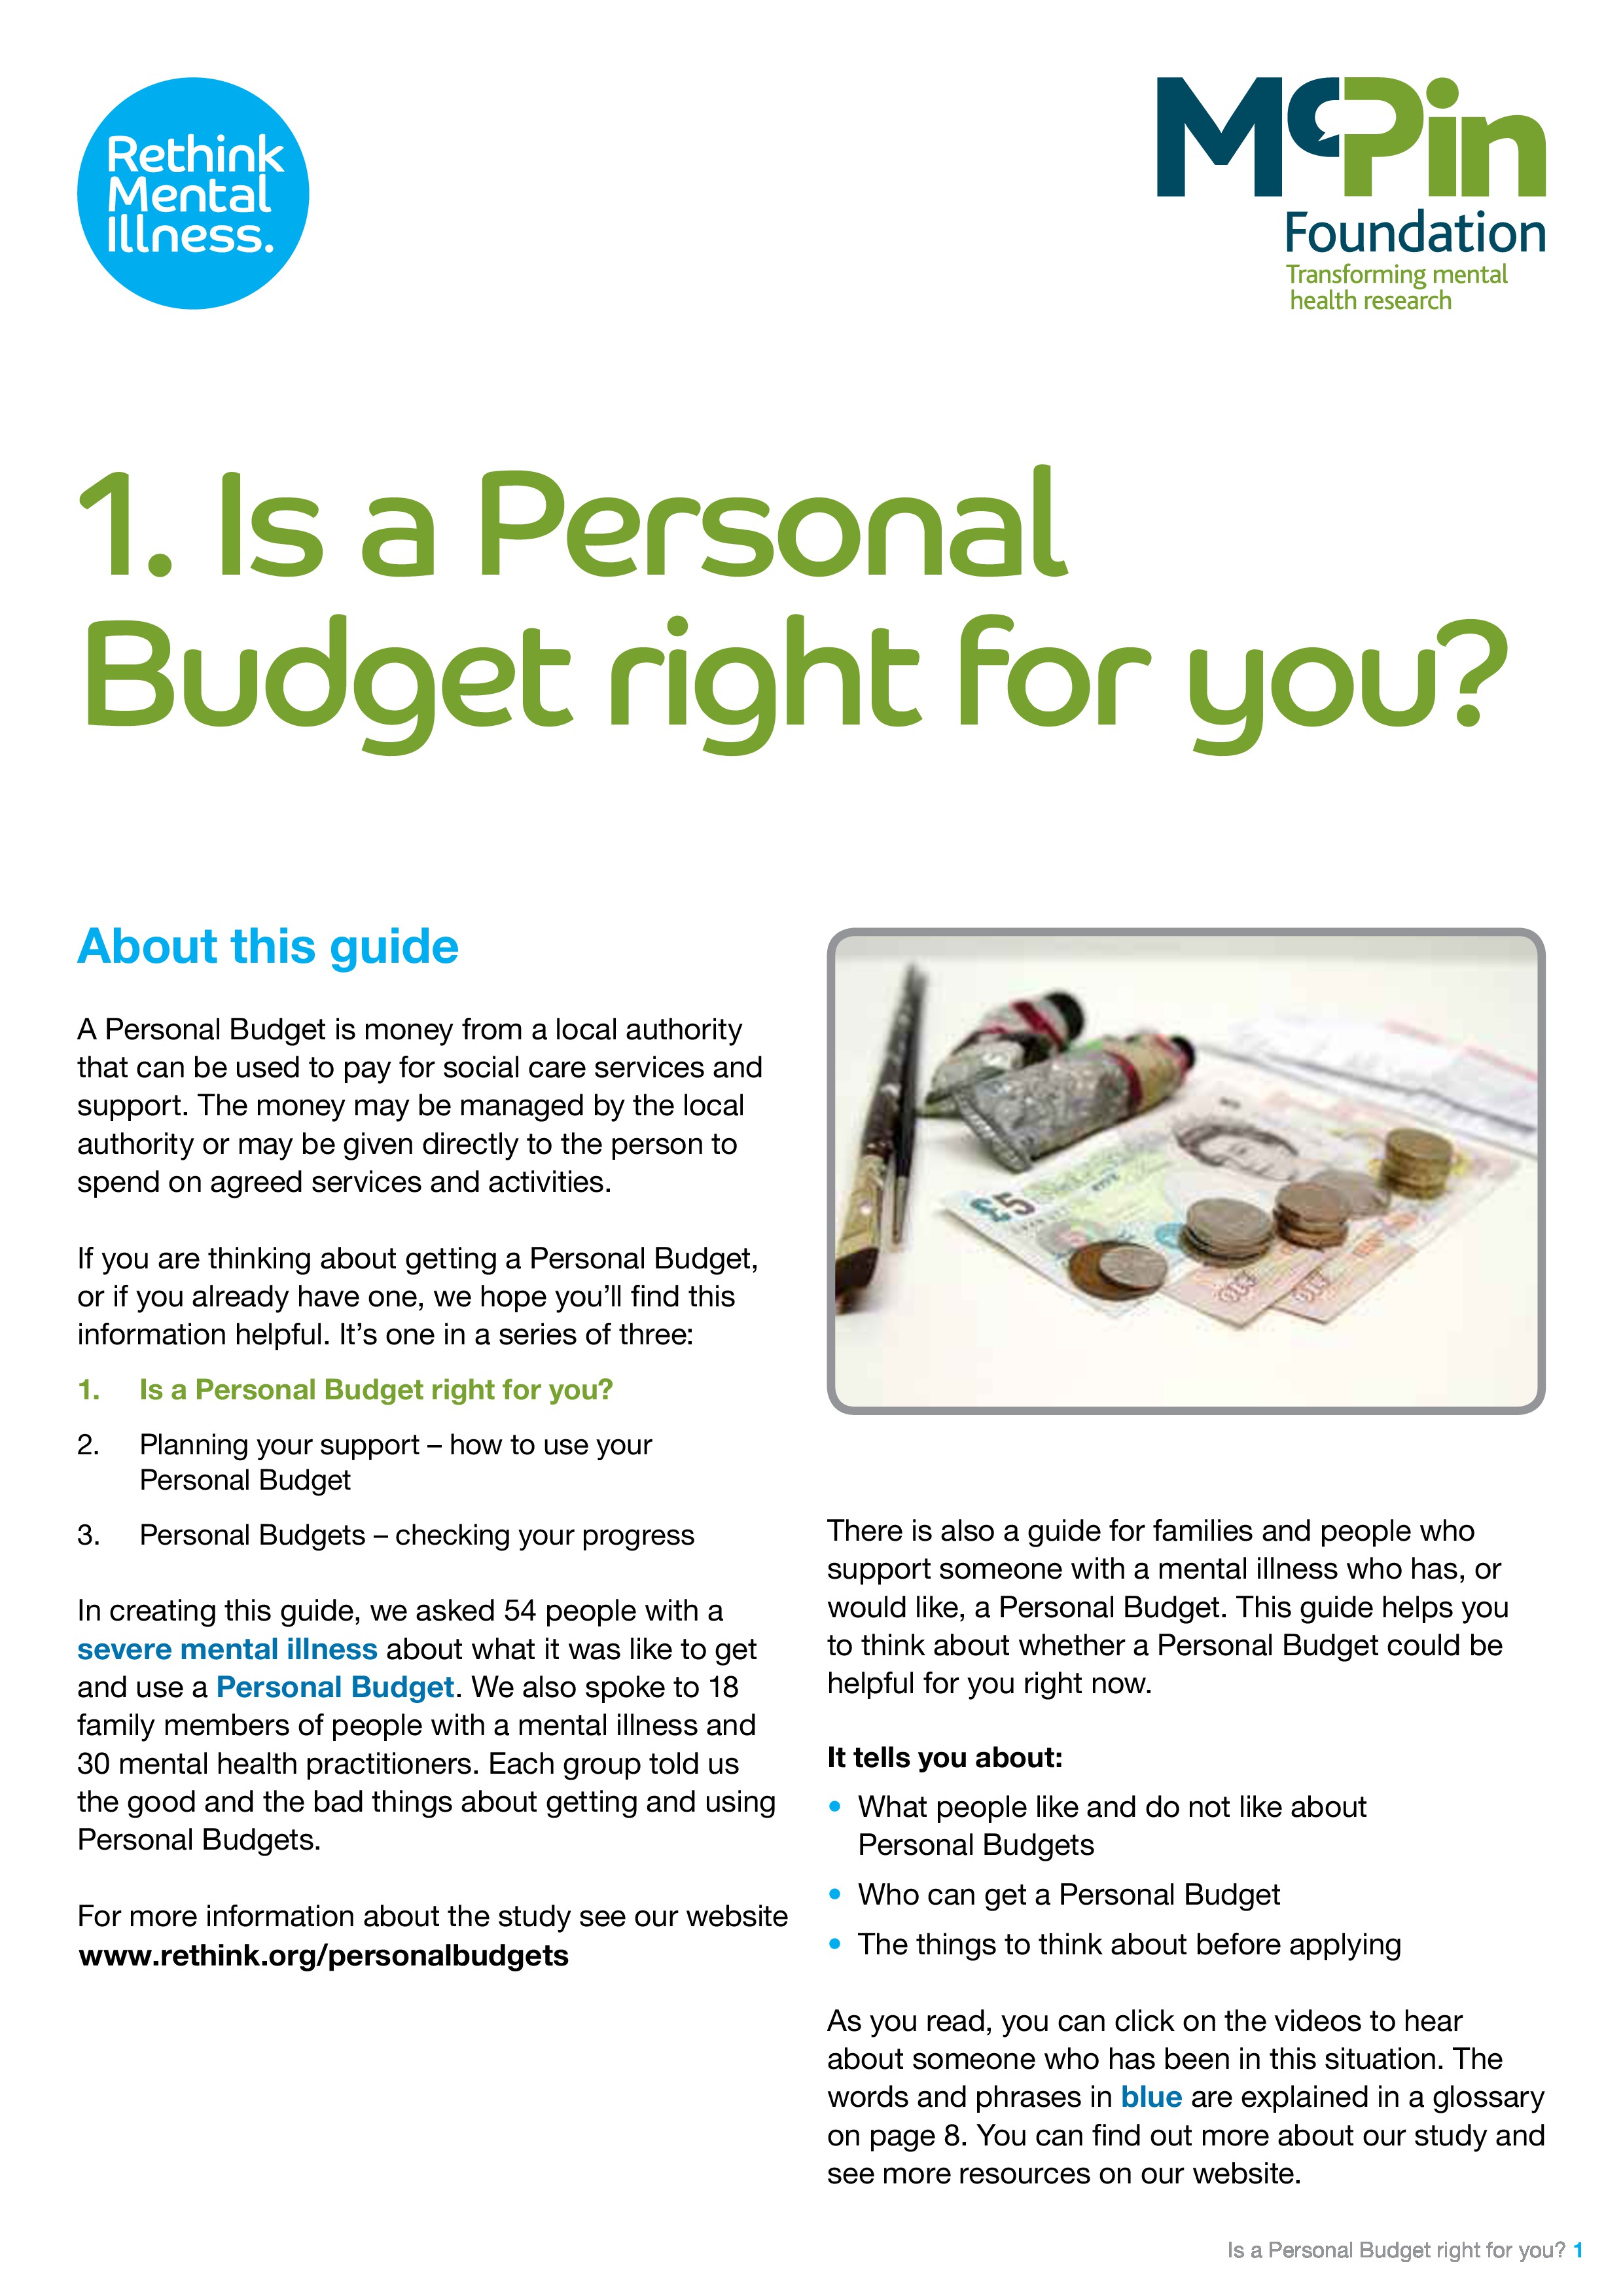 Is a Personal Budget right for you